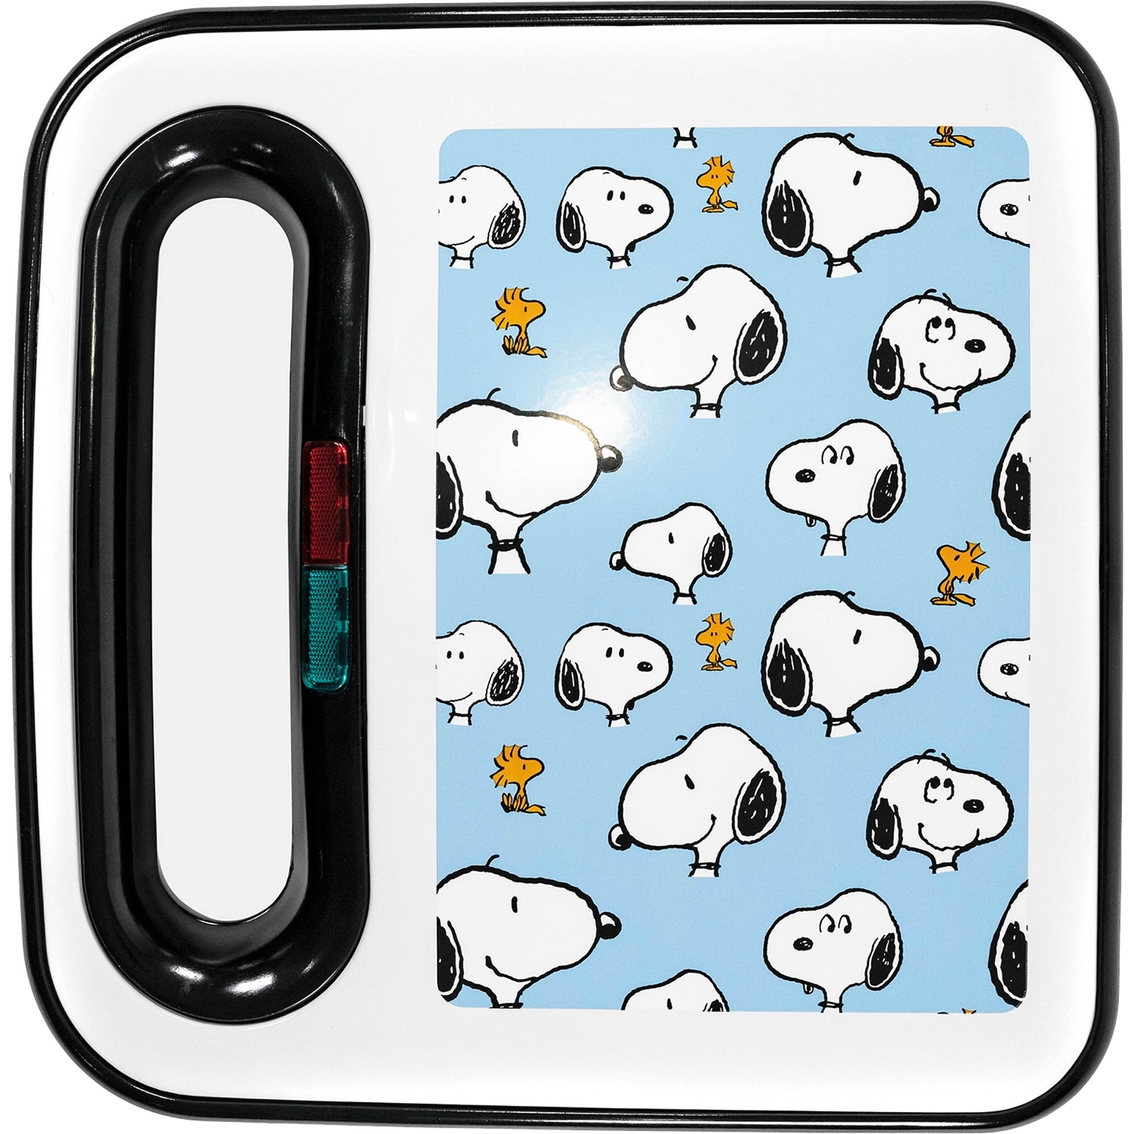 Peanuts Snoopy & Woodstock Double-Square Waffle Maker - Image 3 of 6